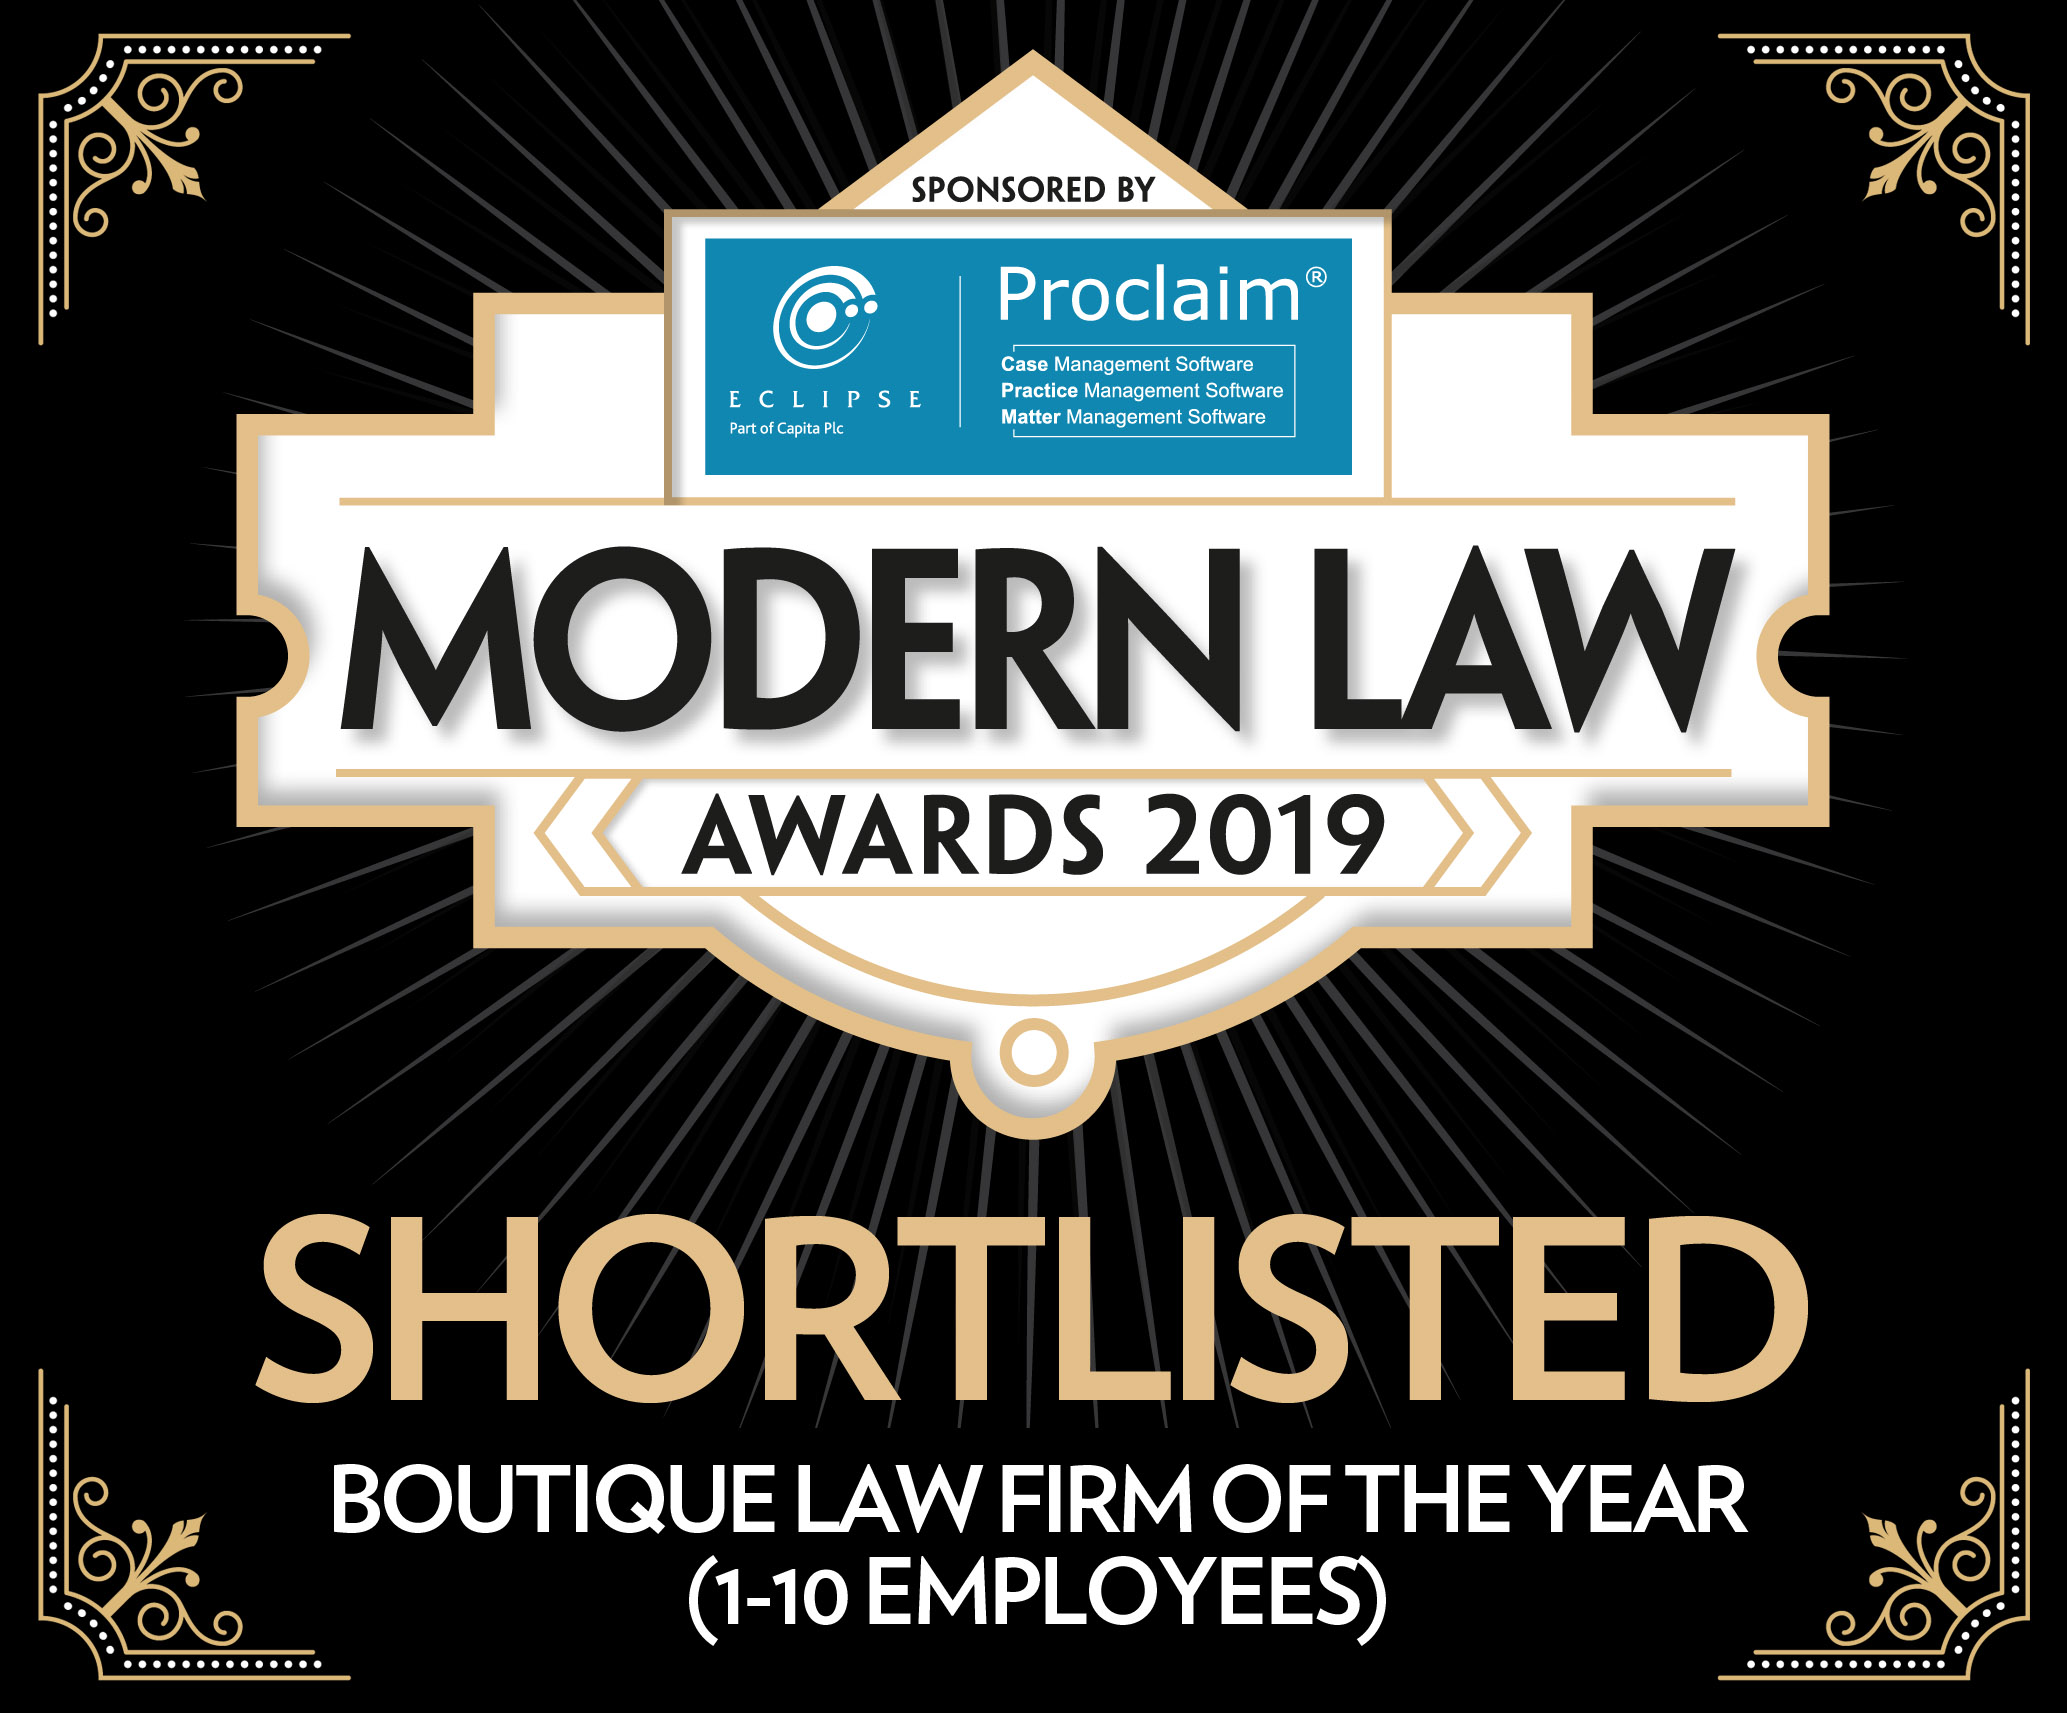 Consilia Legal Shortlisted for the Modern Law Awards